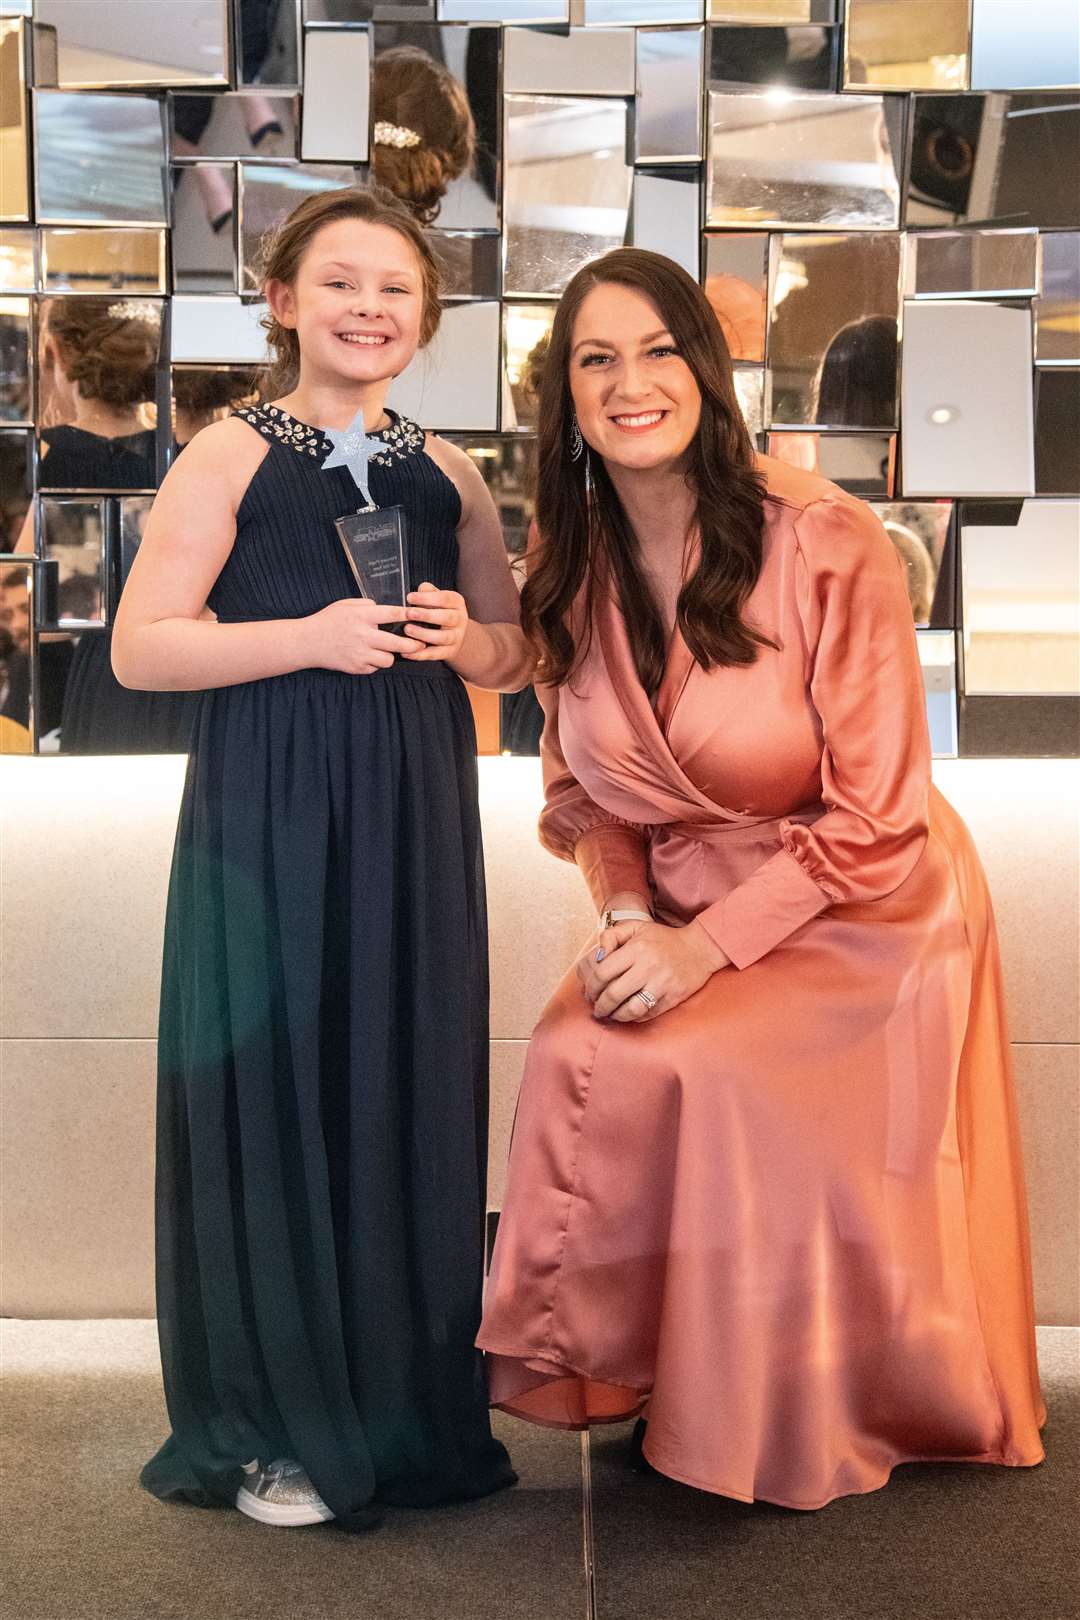 Winner of the Primary Pupil Award Rhea Stephen who received her award from Sarah Medcraf on behalf of AD Walker. Picture: Daniel Forsyth